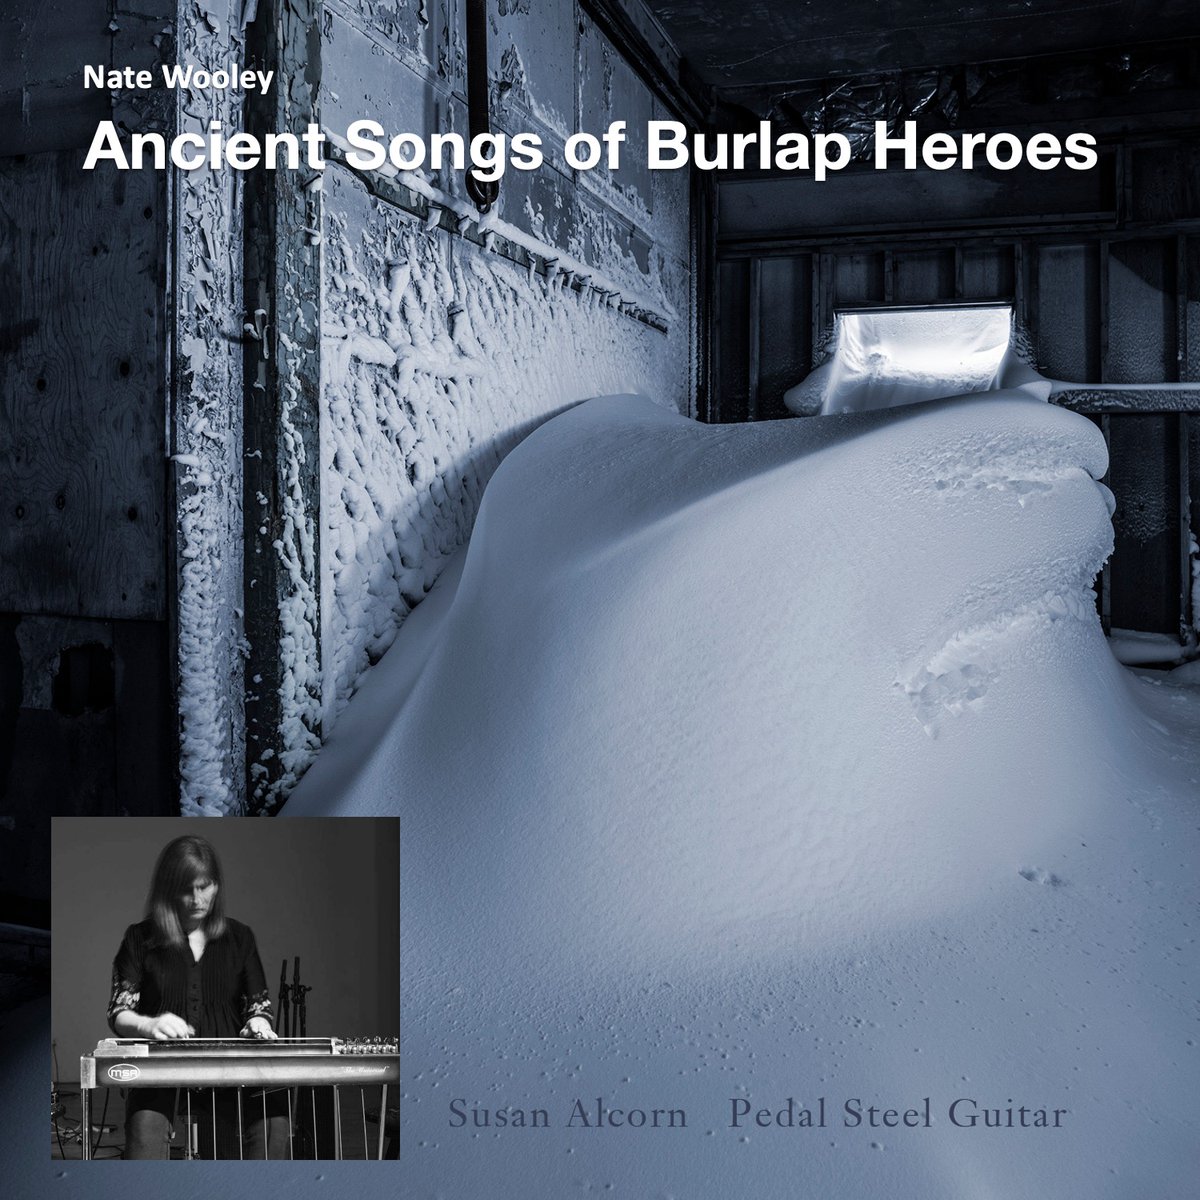 Susan Alcorn plays pedal steel guitar on “Ancient Songs of Burlap Heroes,” due out July 29, 2022. Pre-order ”Ancient Songs of Burlap Heroes” natewooleypyroclastic.bandcamp.com/album/ancient-…